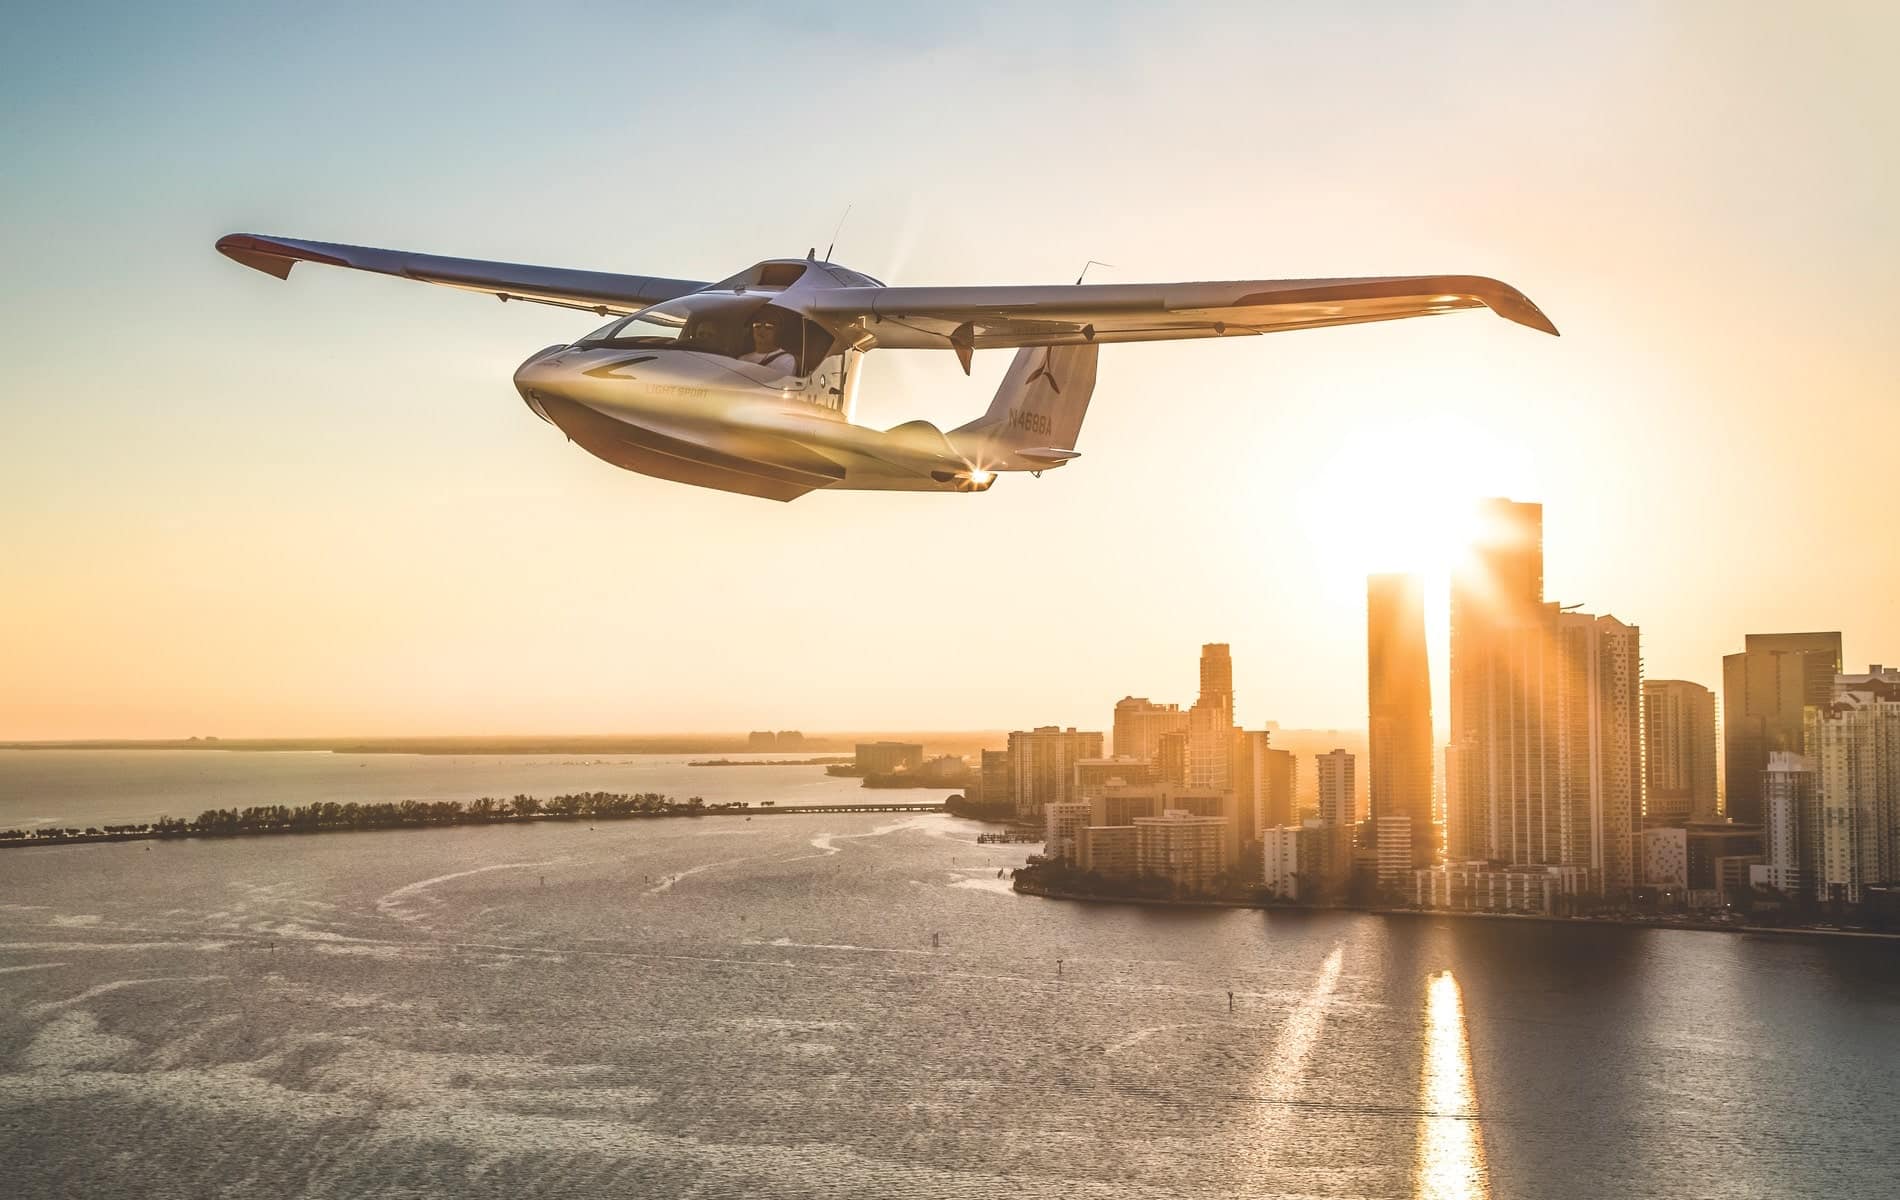 ICON Aircraft recently debuted its Fleet Access program to help aspiring ICON A5 owners become part of the action through shareholder purchasing options.